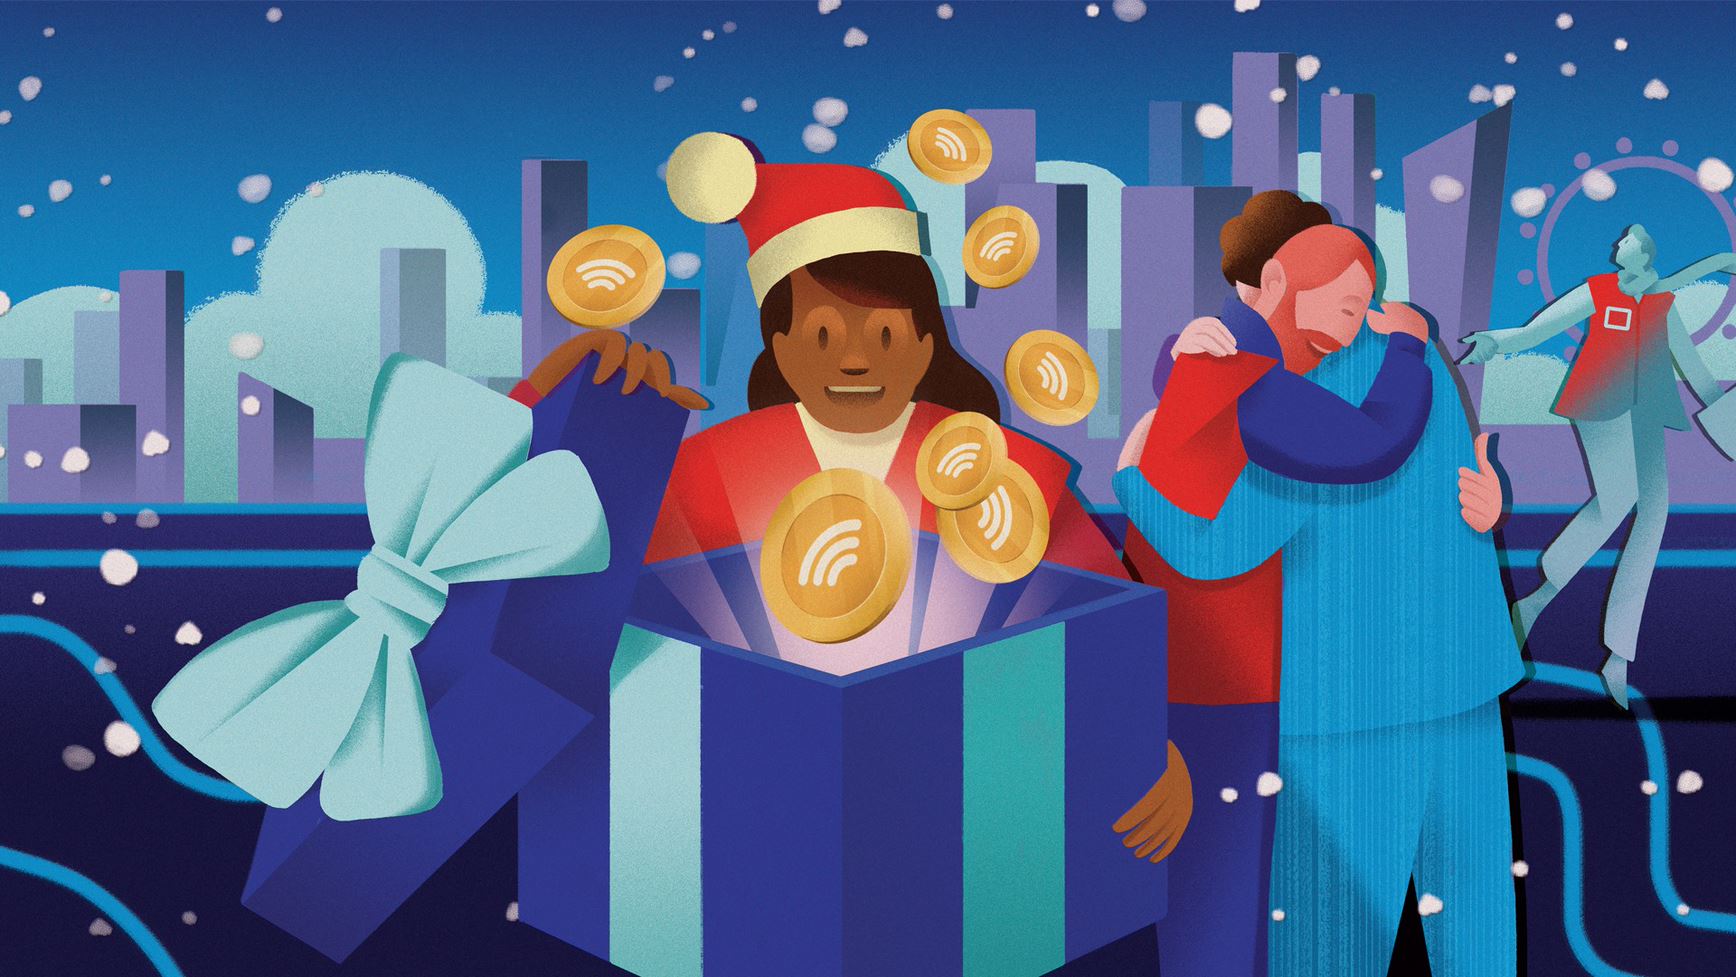 An illustration of a person struggling with digital poverty in the snow, wearing a Santa hat, opening a gift containing data while two men hug behind her, with a stylised London skyline as the backdrop